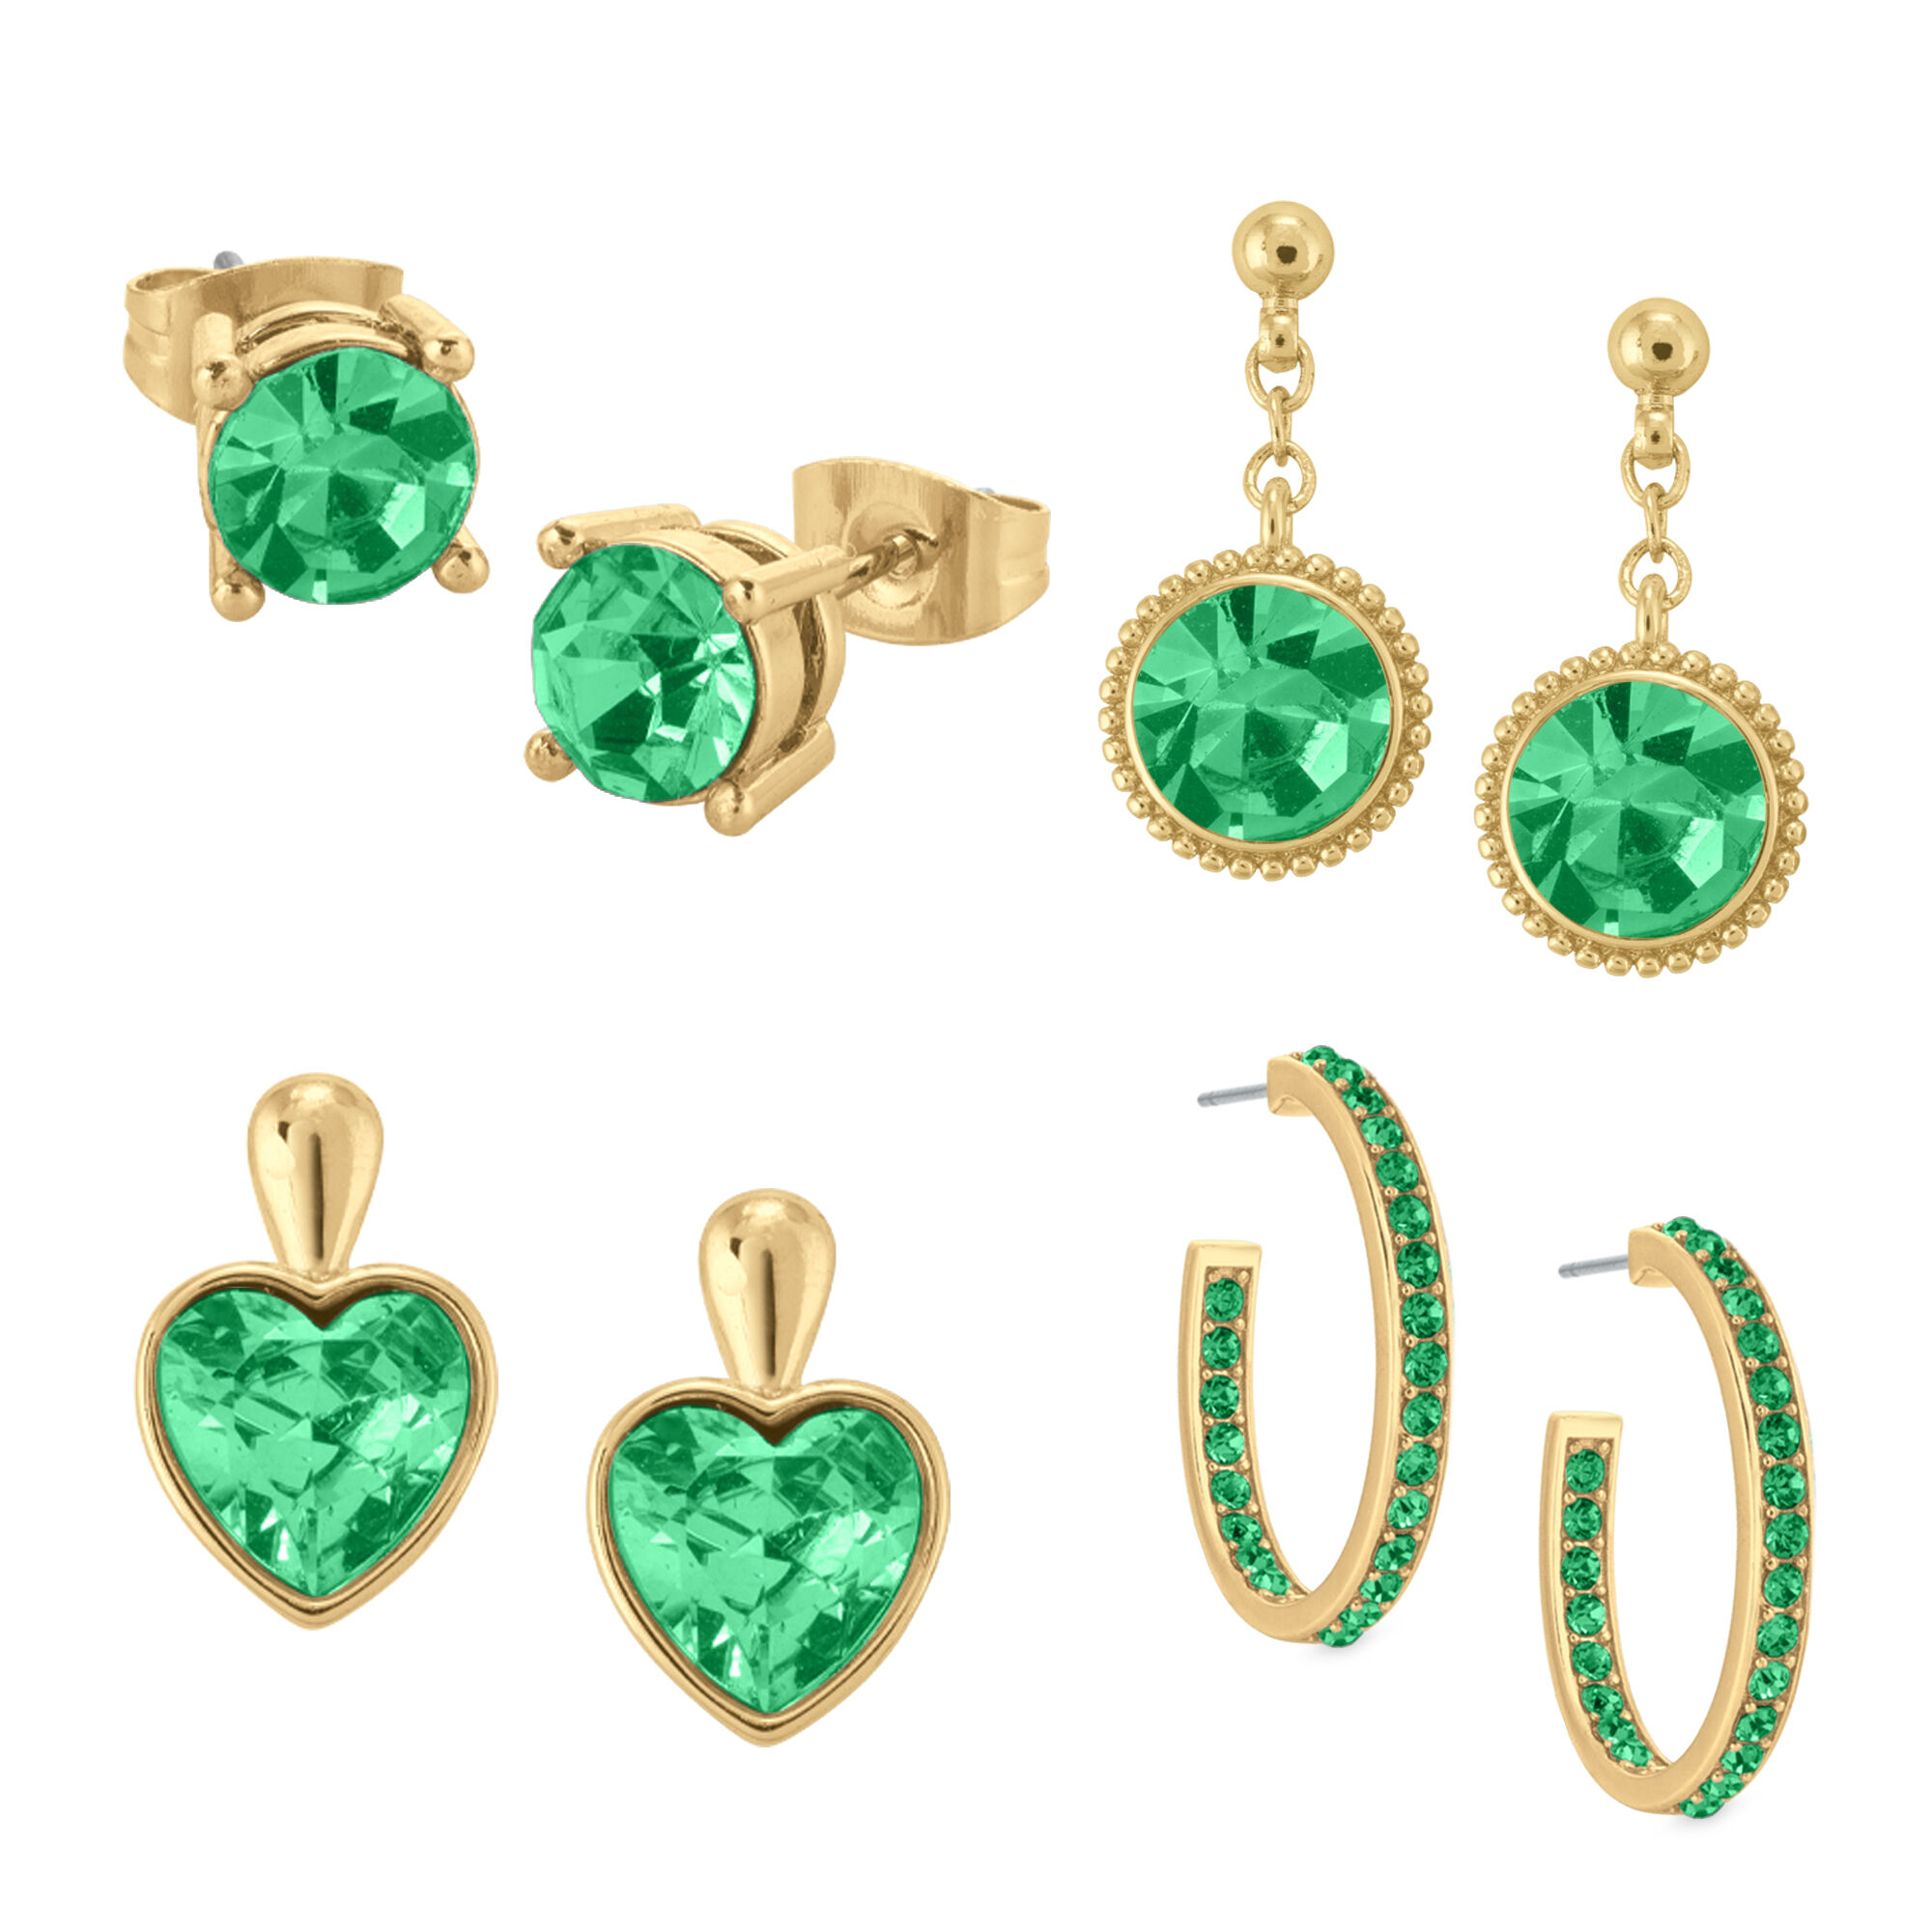 The Essential Birthstone Earring Set 11034 0015 e may